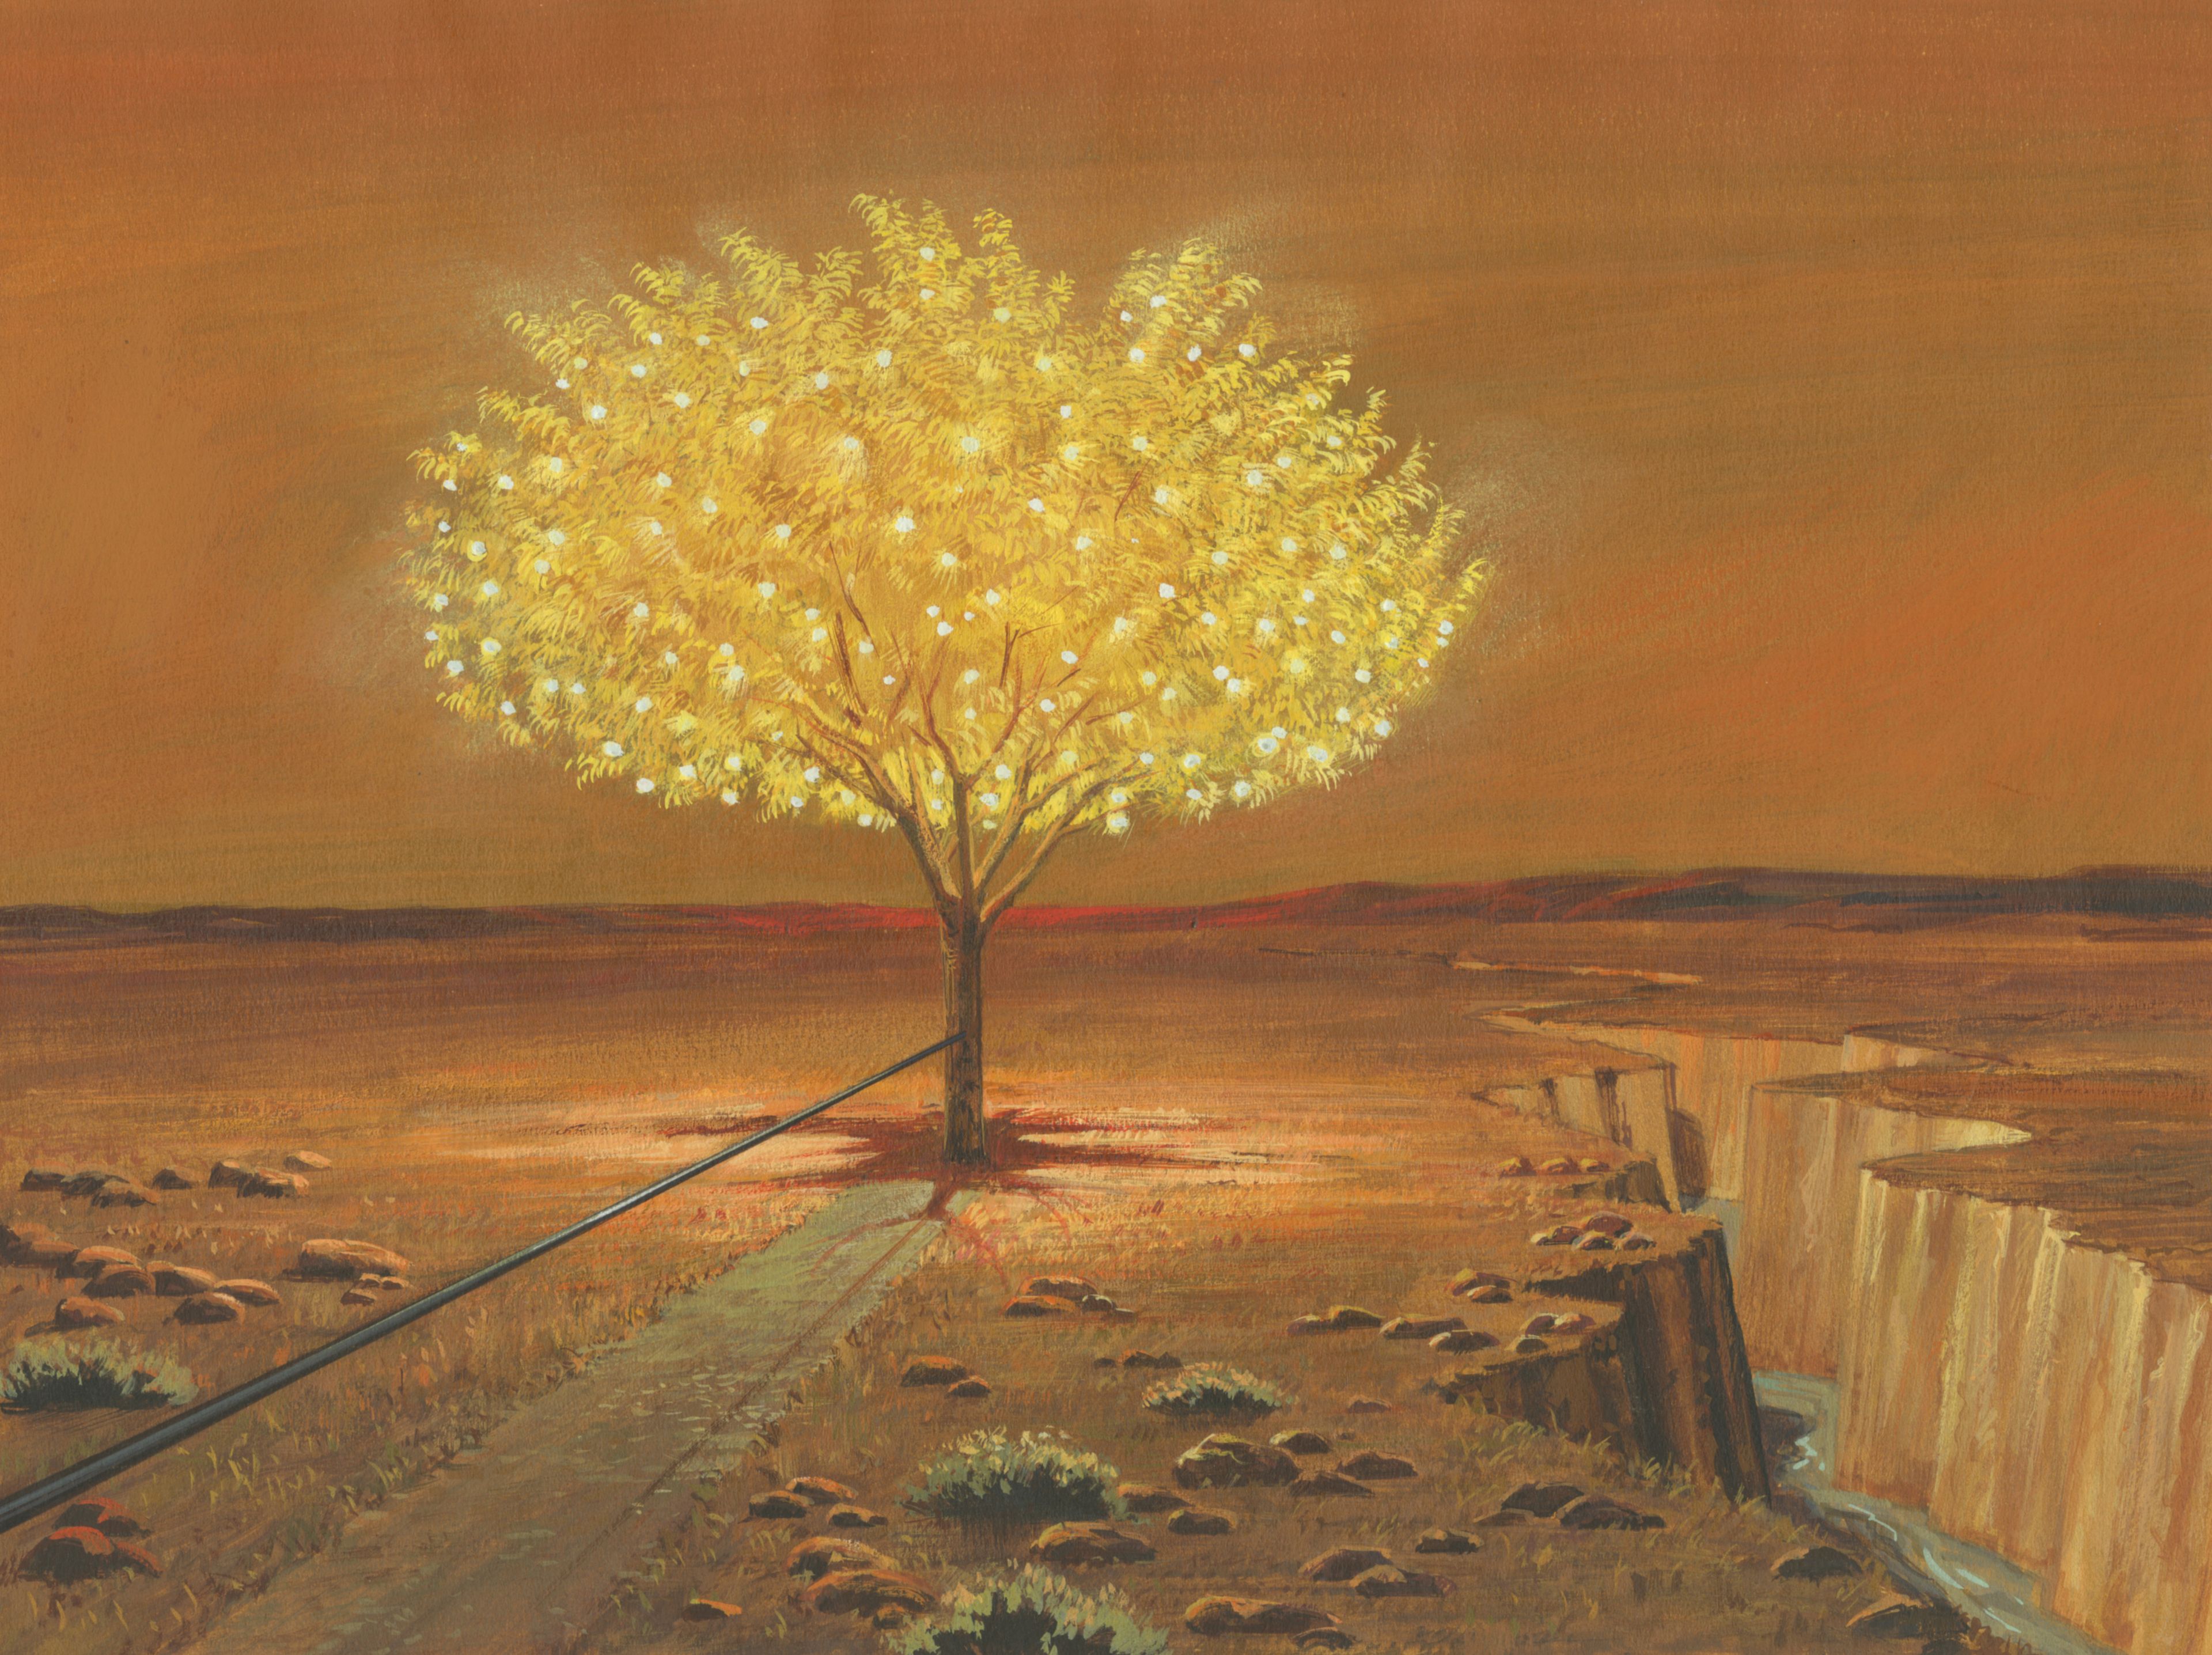 A painting by Jerry Thompson depicting the tree of life and rod of iron; Primary manual 4-13